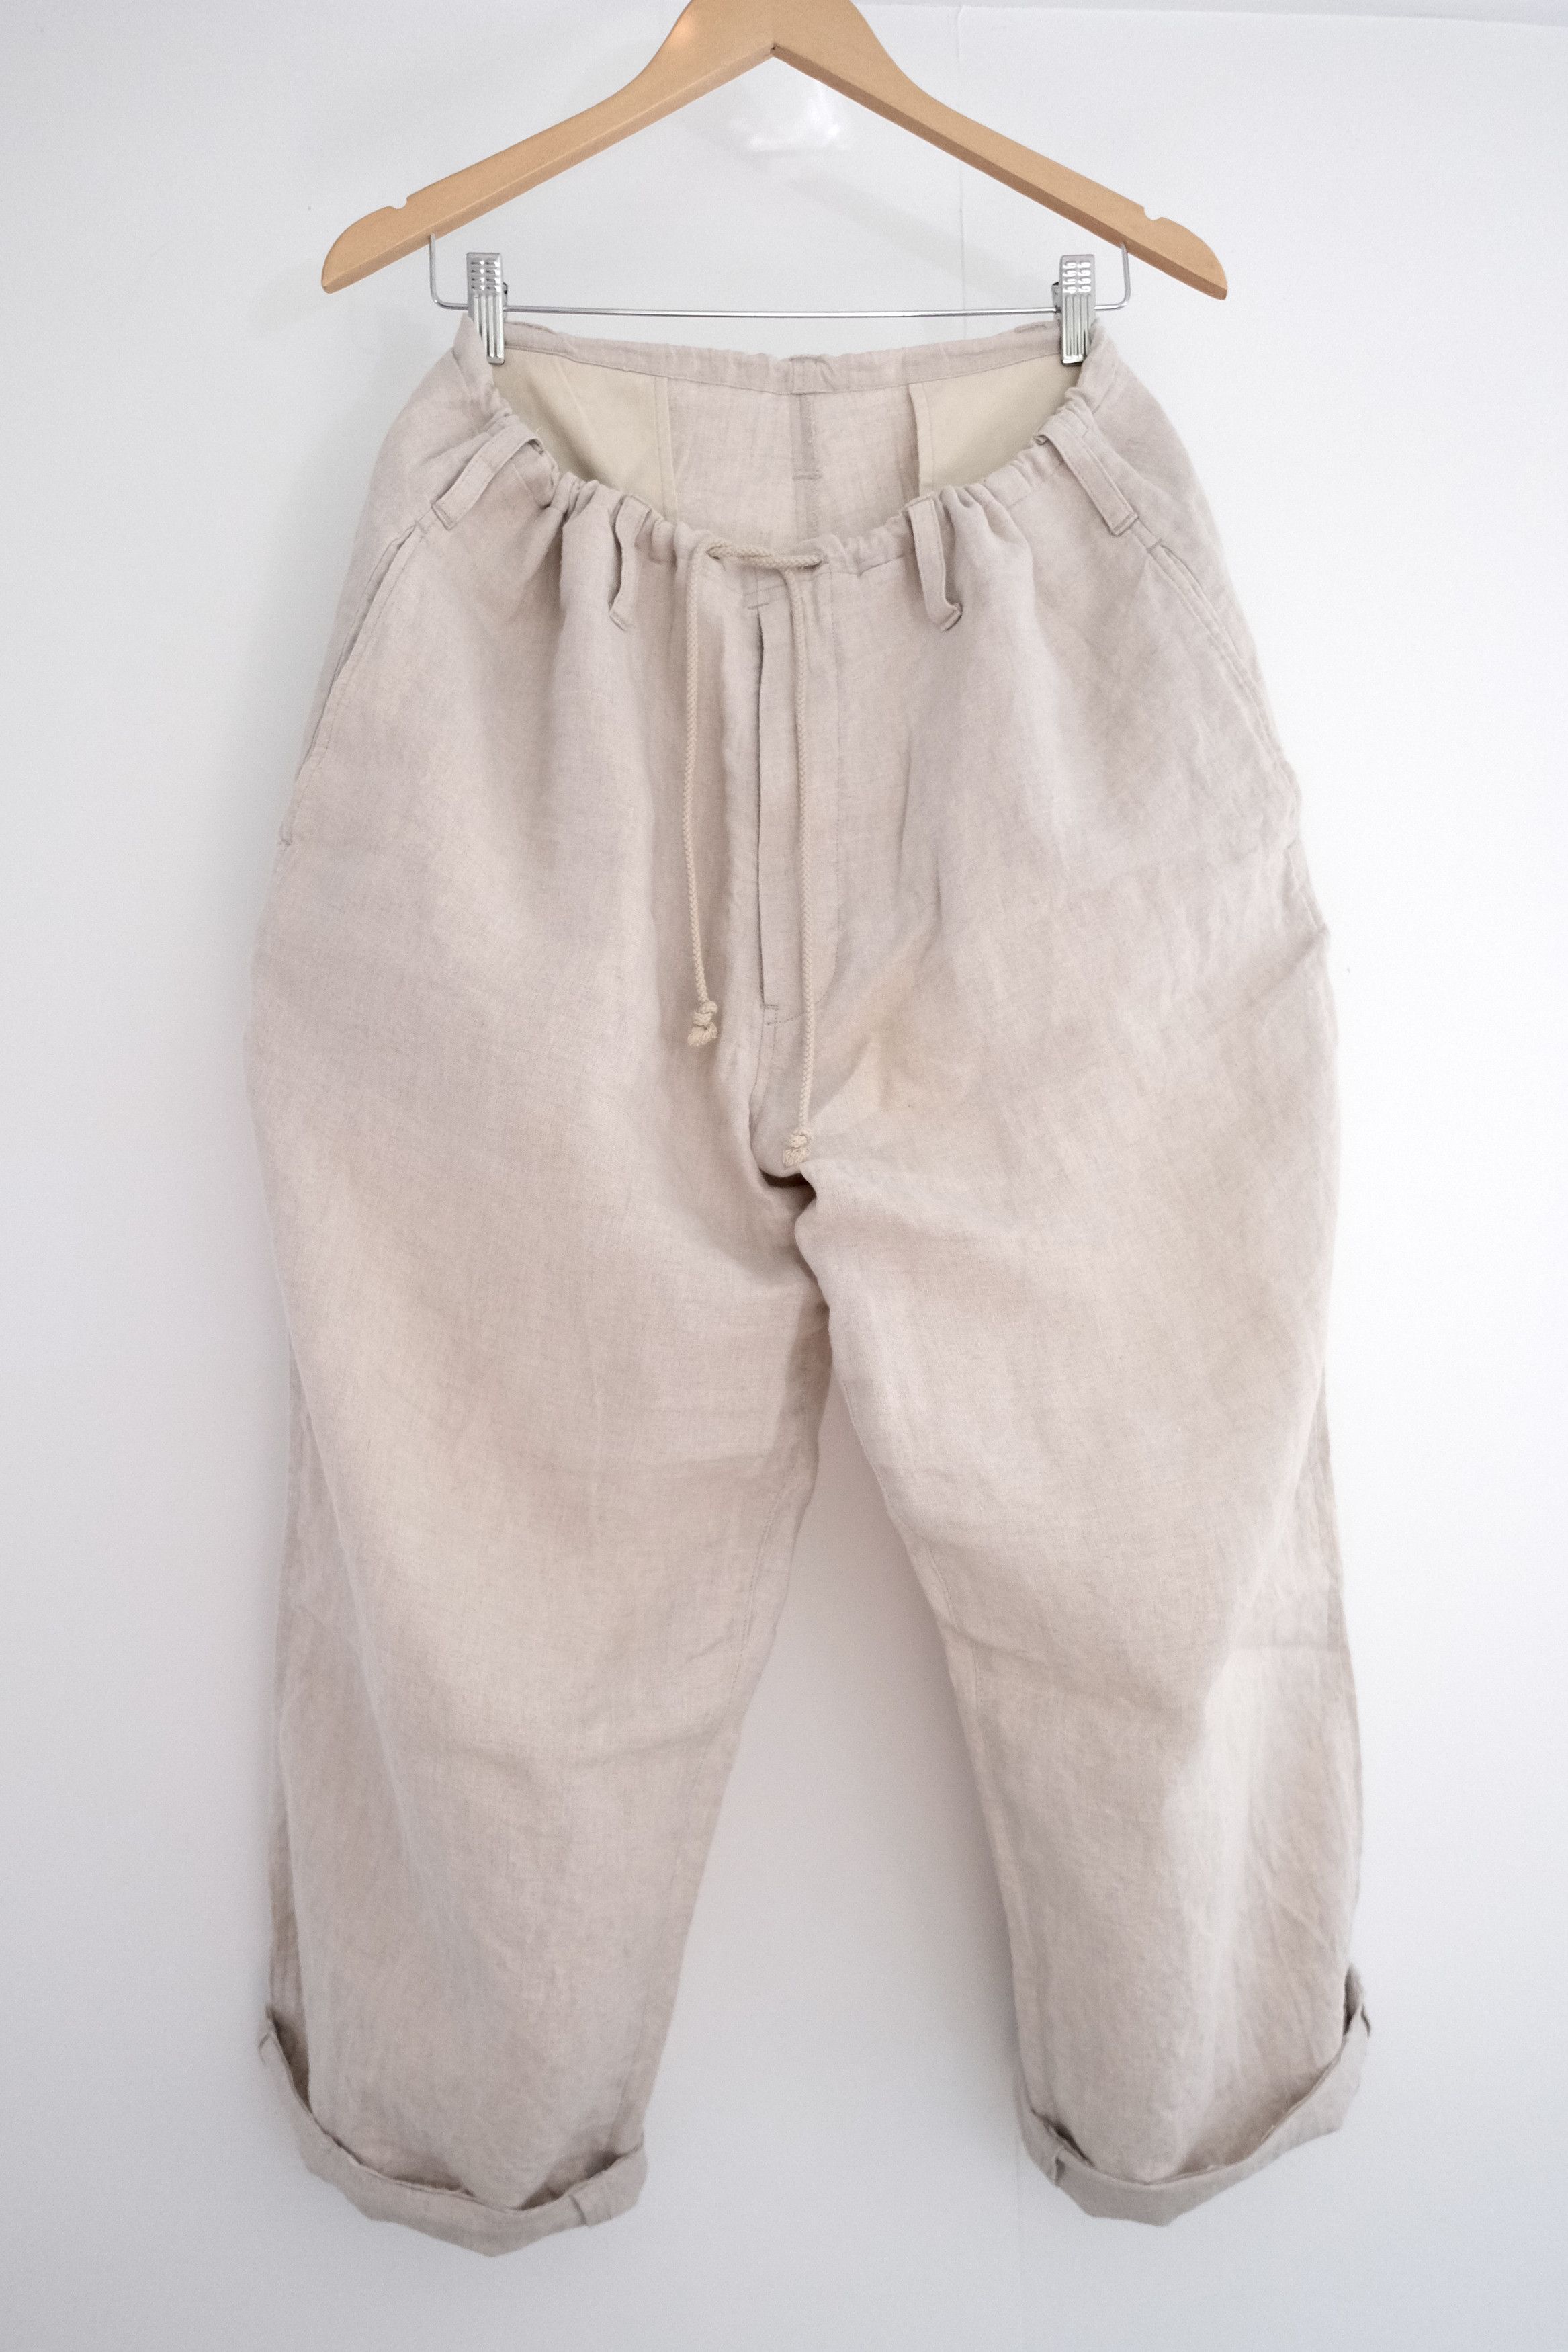 🎐 YYPH SS18 Wide Drawstring Linen Easy Pants - 1